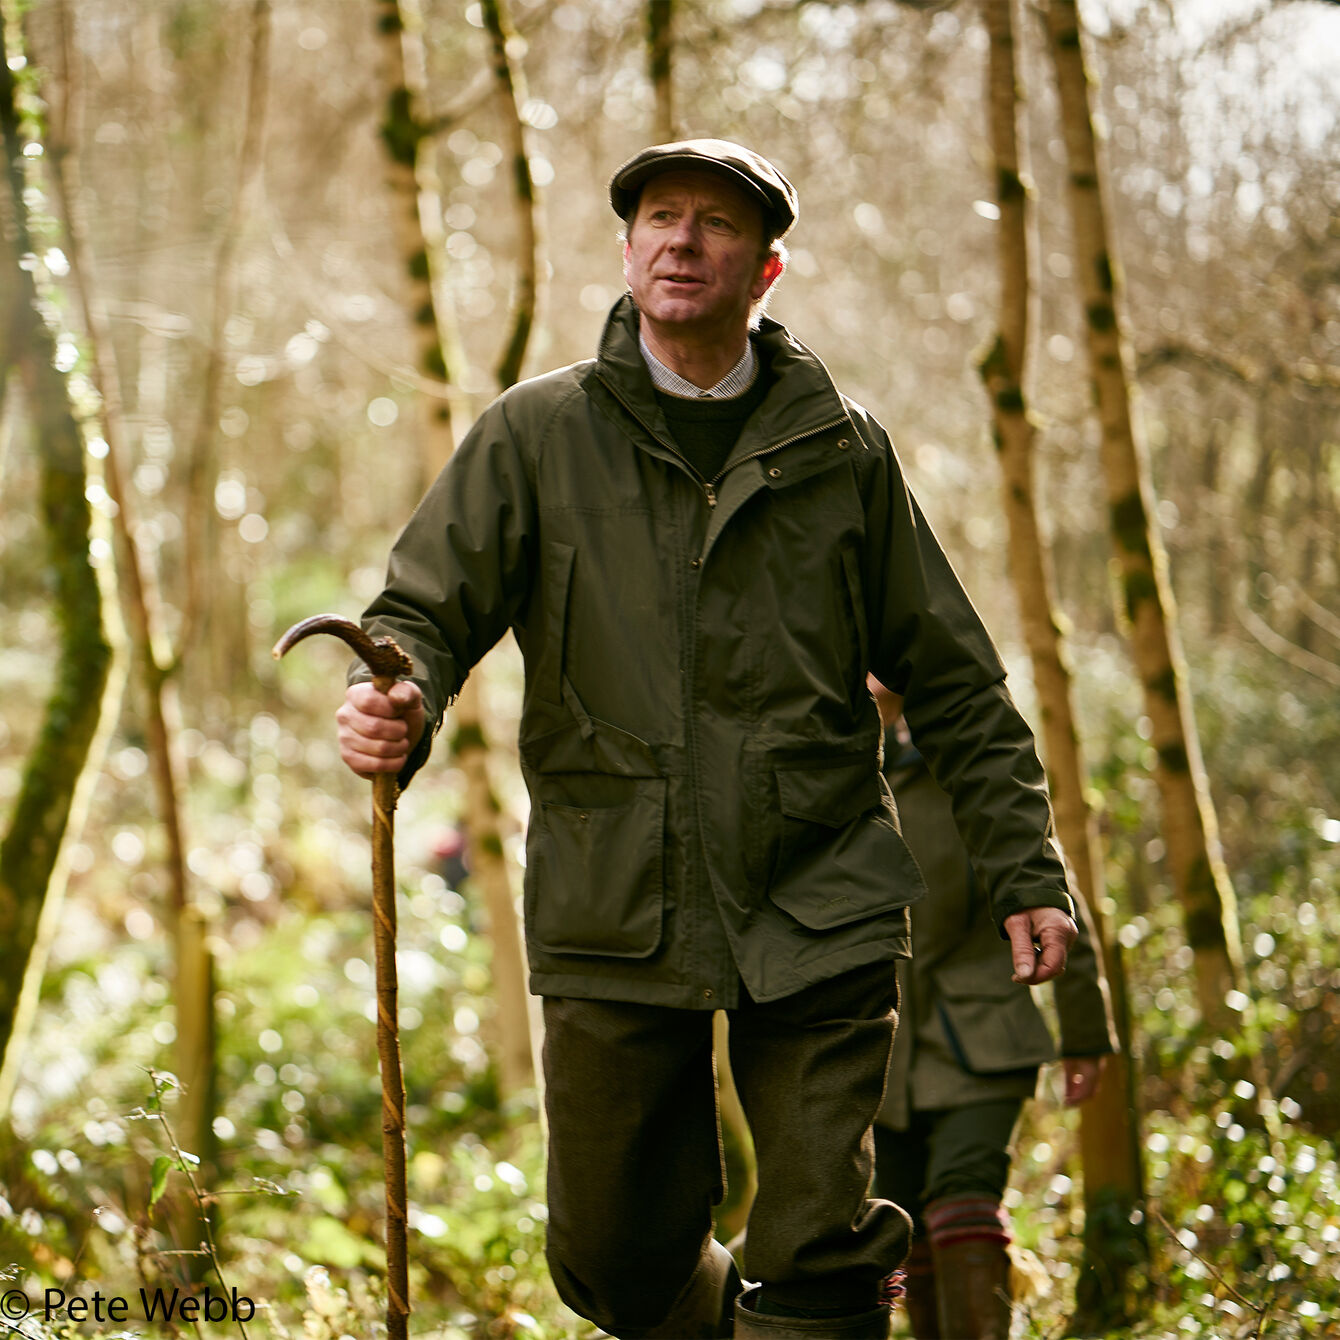 Versatile. And packable. This award-winning Fenland BR2 Packaway Jacket is incredibly light, at just 600g